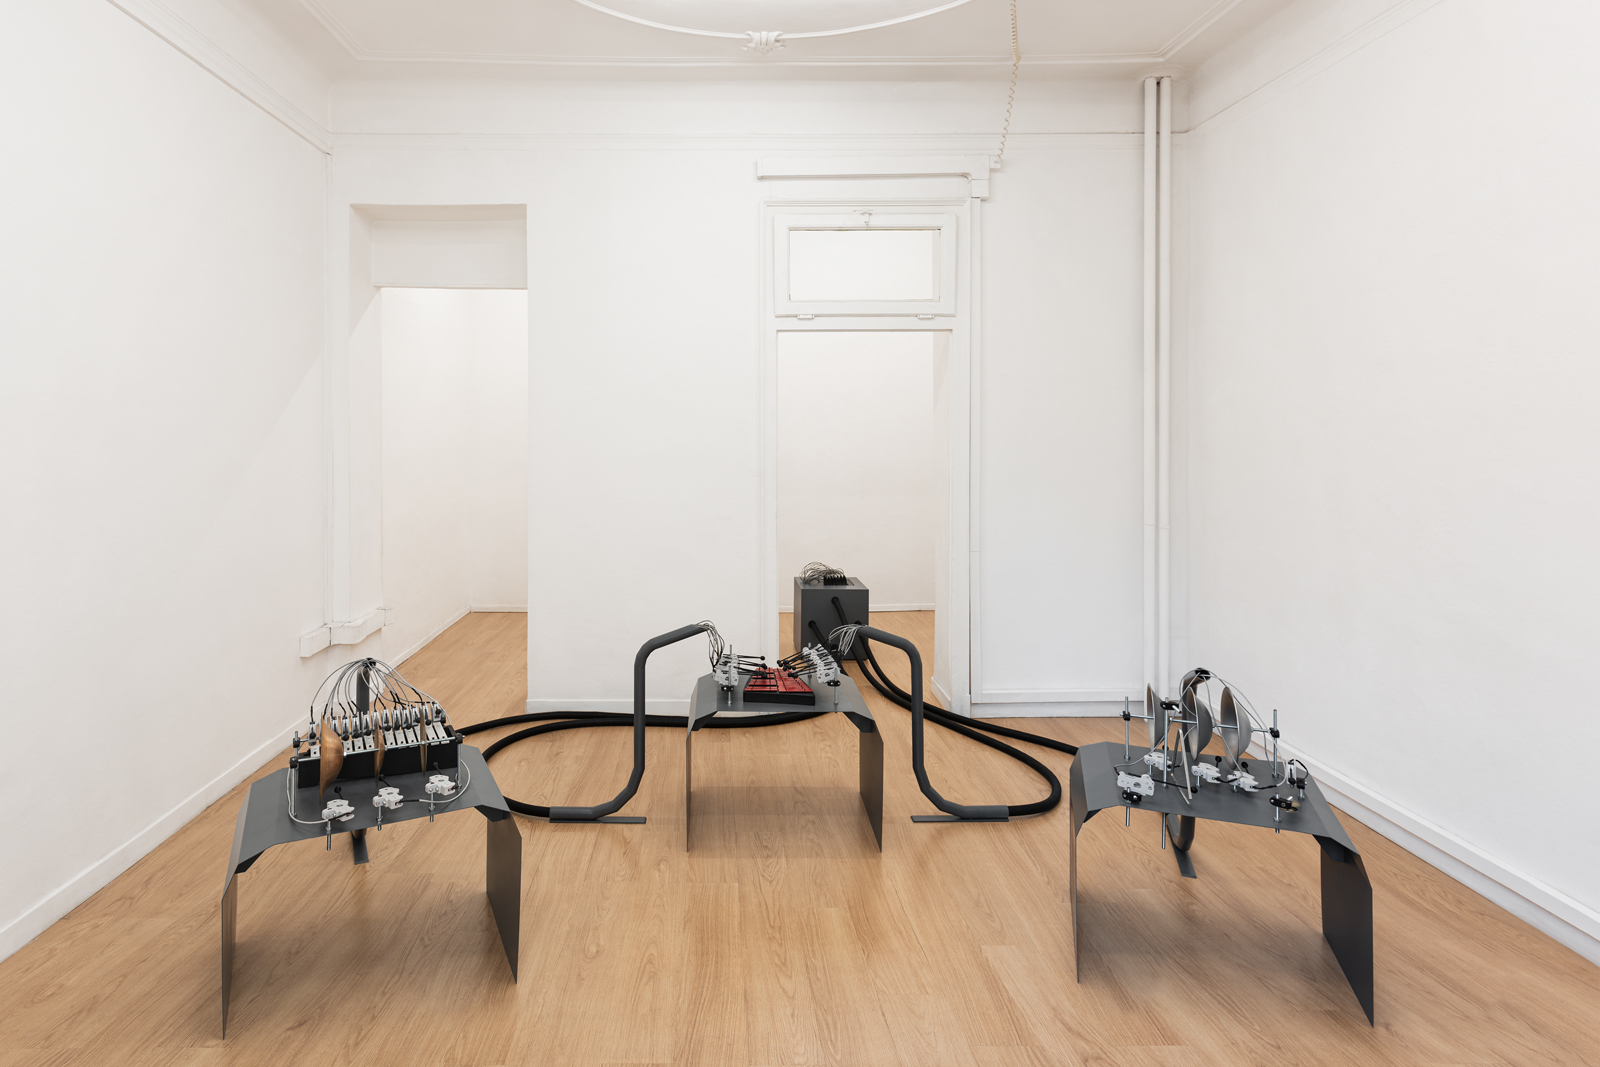 Matteo Nasini, A Distant Chime, 2023 Installation view at Clima, Milan